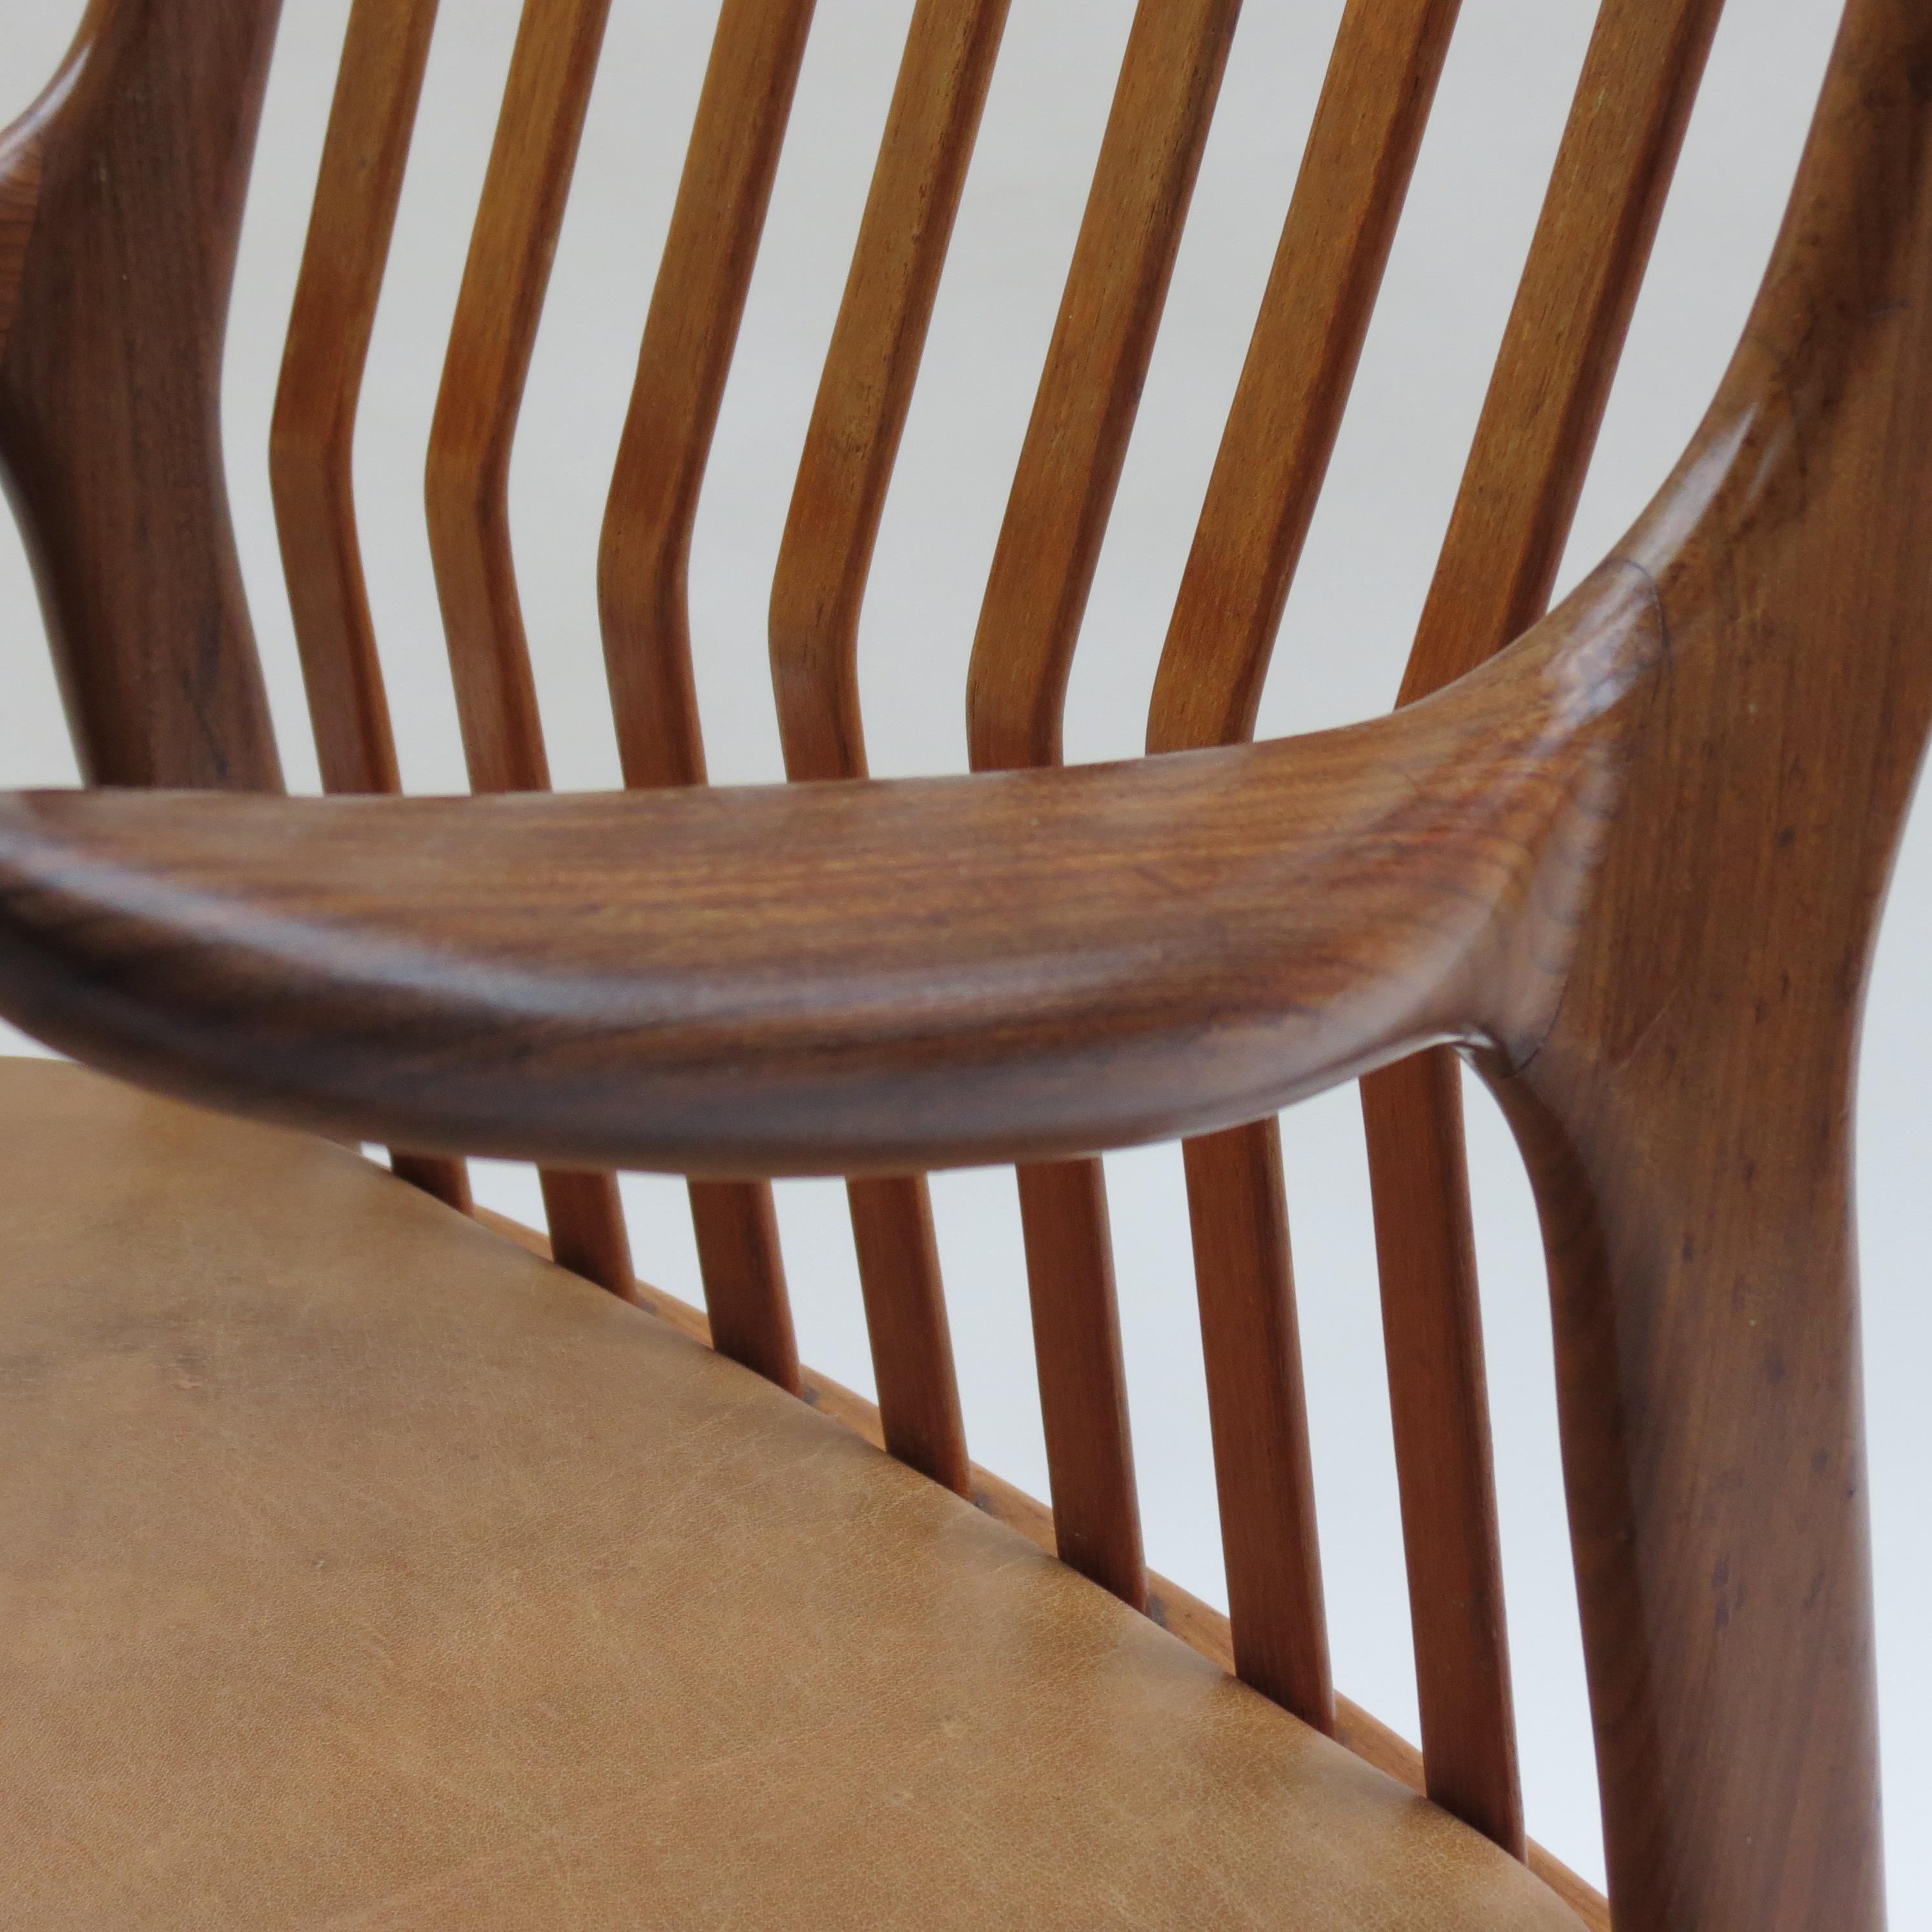 Midcentury Danish Chair by Svend Madsen 1960s Teak with Leather Seat 5